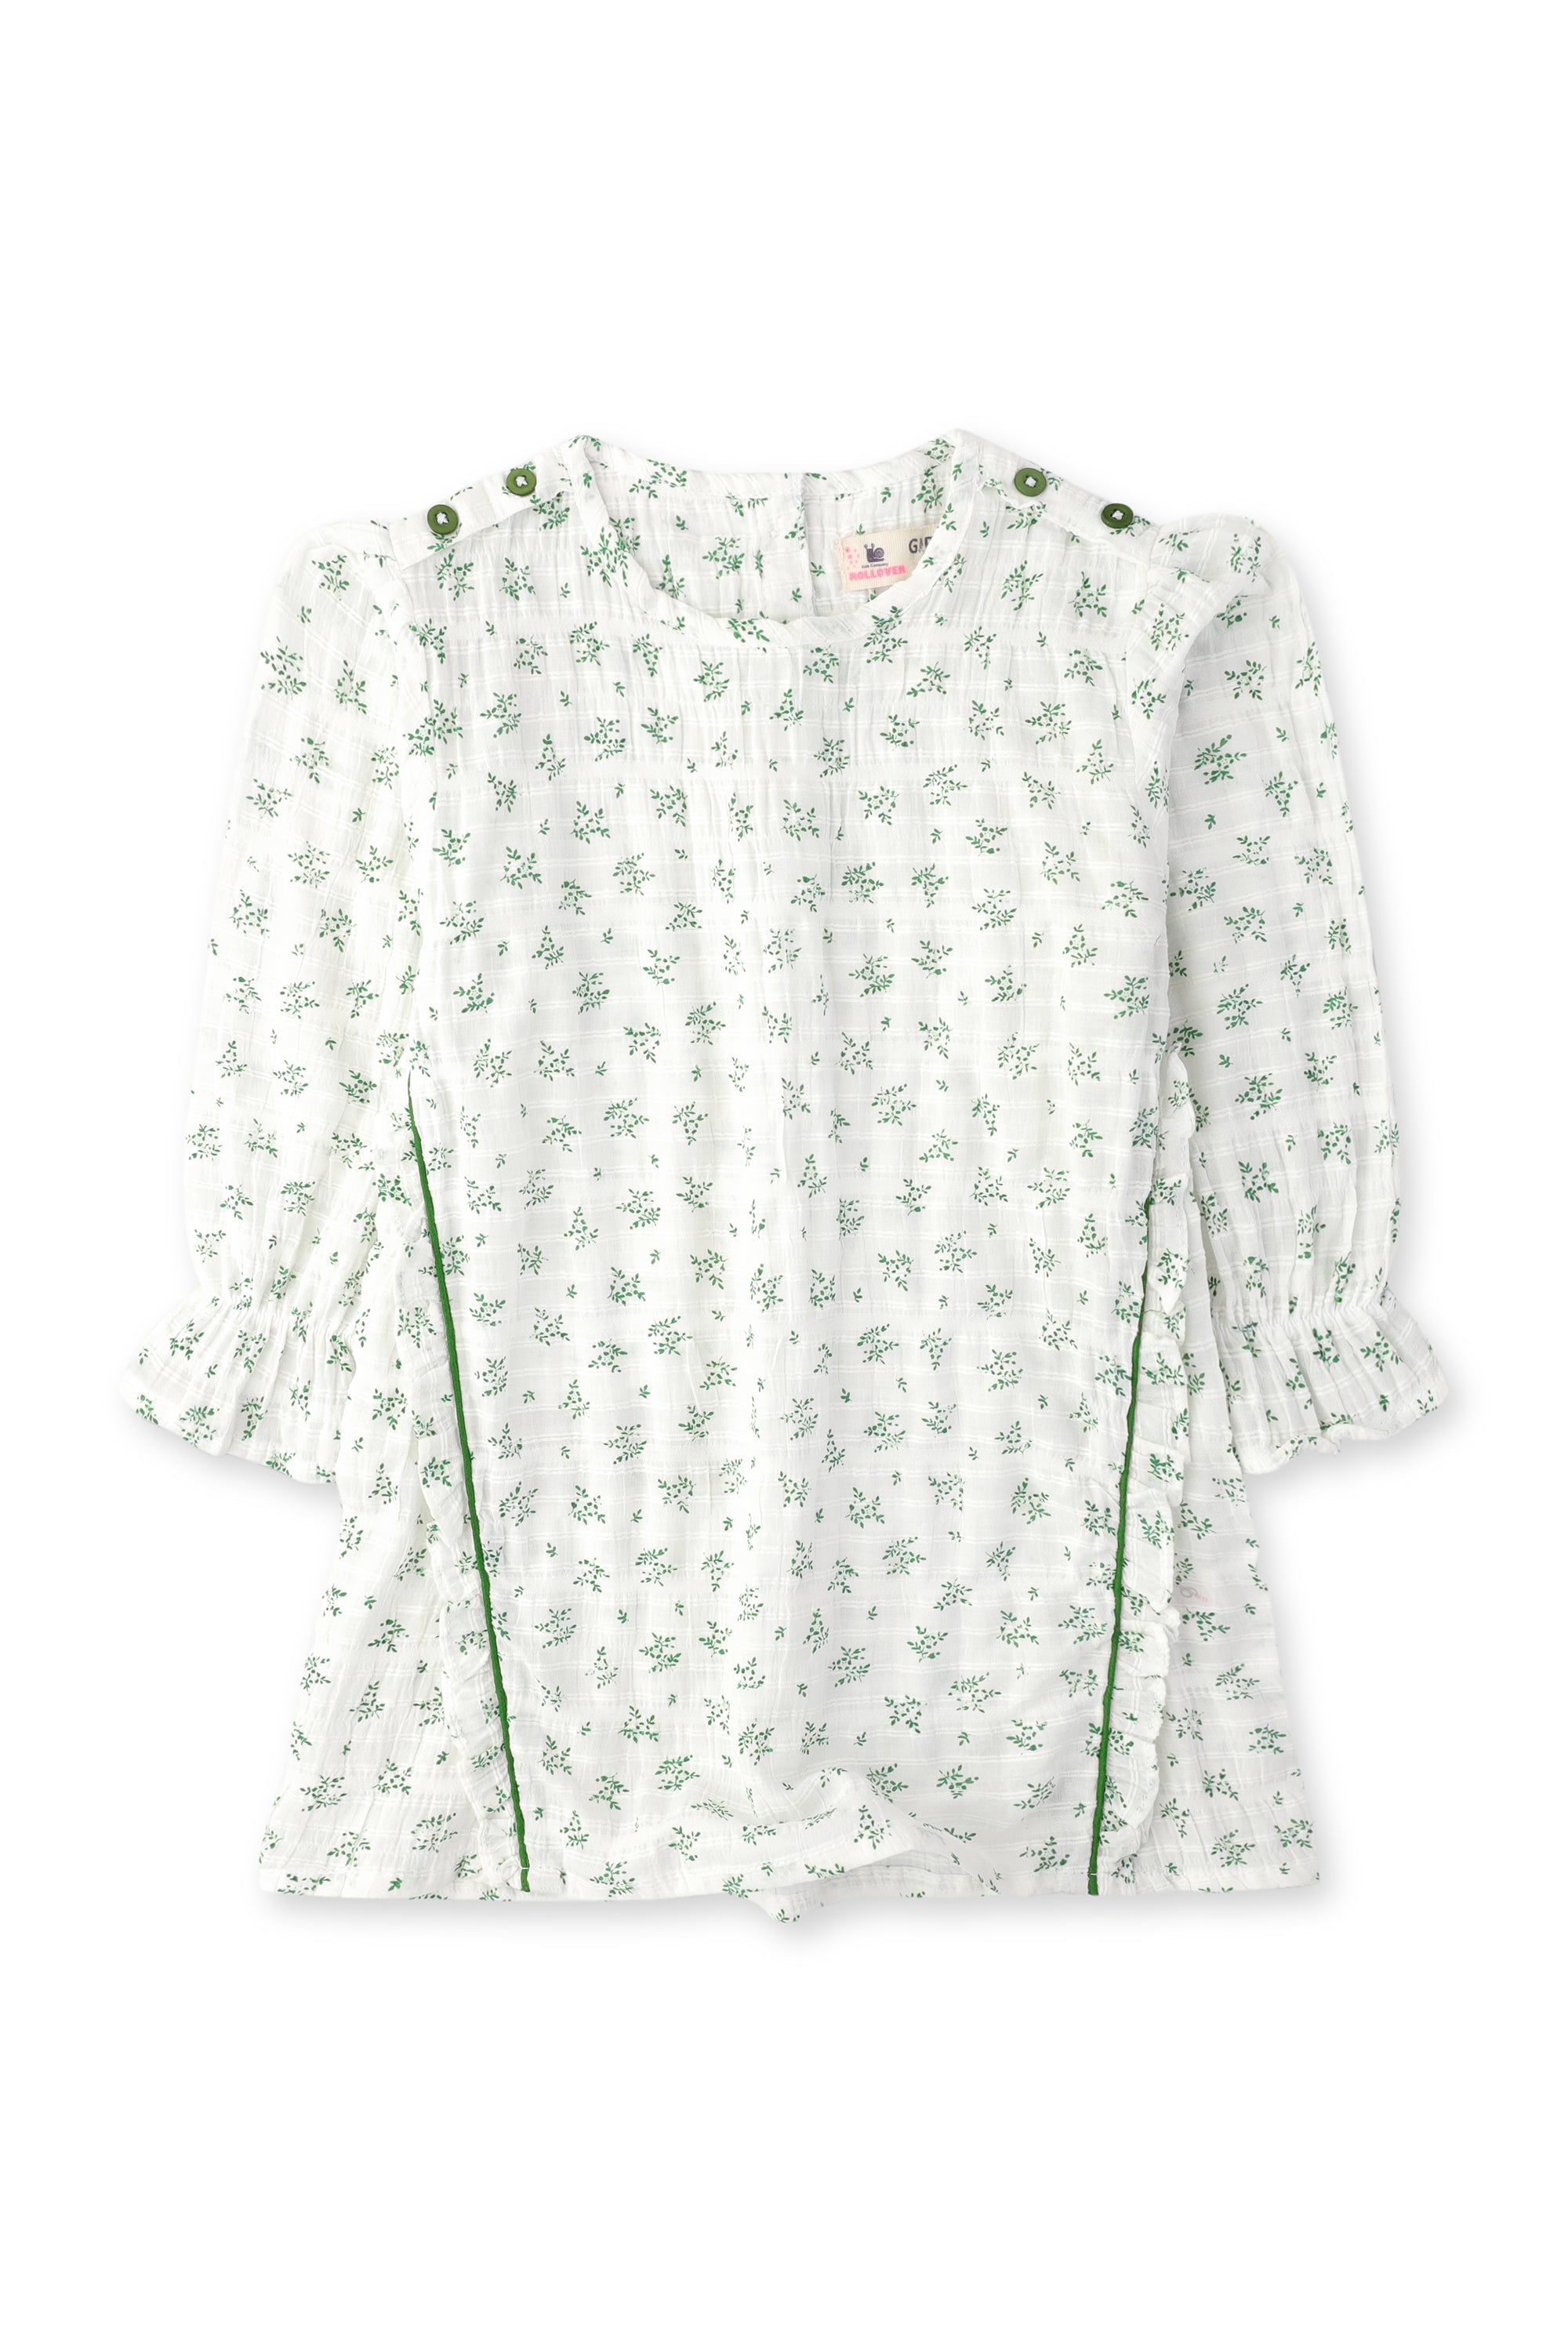 Girls White Shirt With Leaves Print